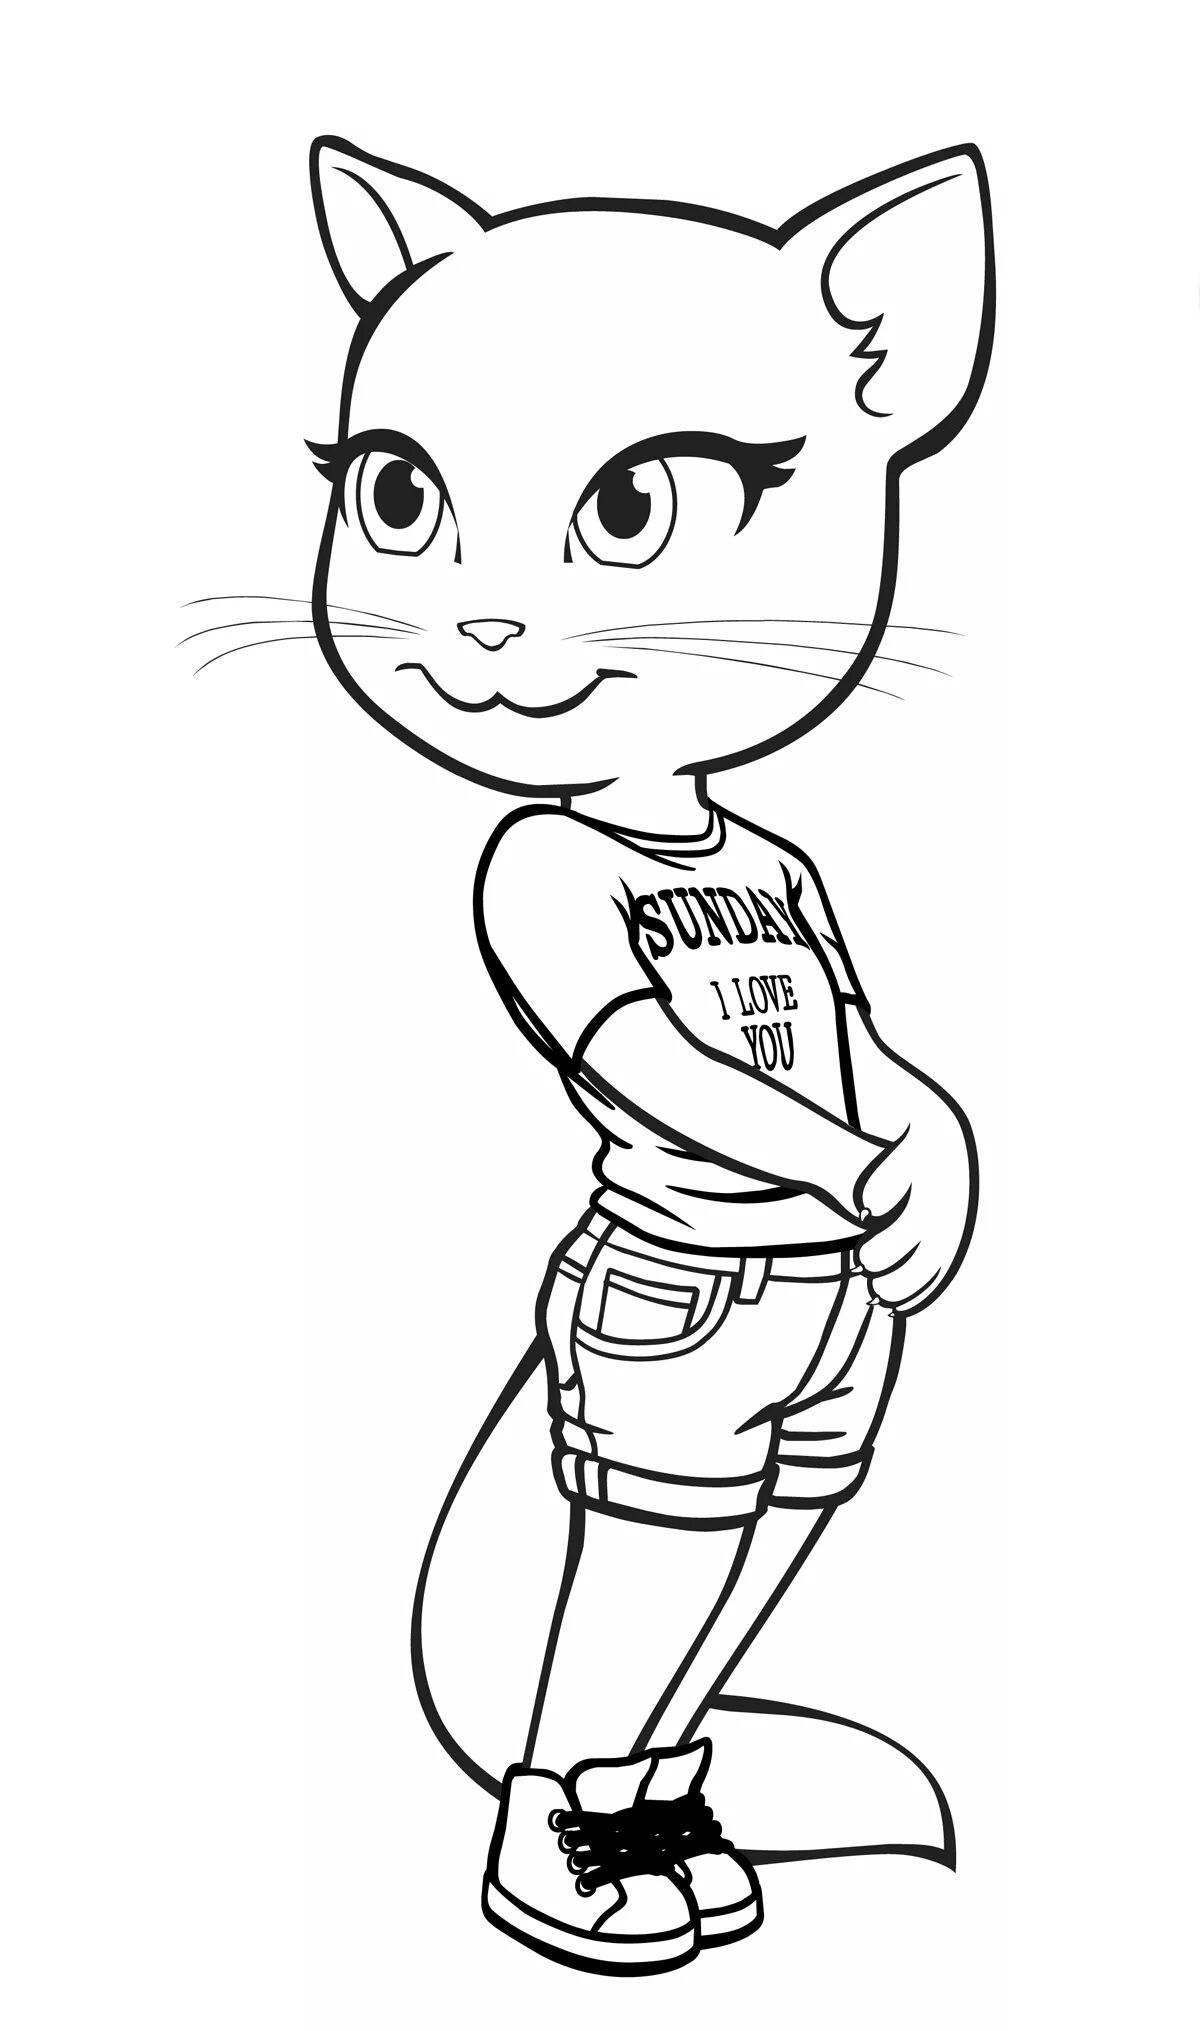 Talking Angela coloring page full of color